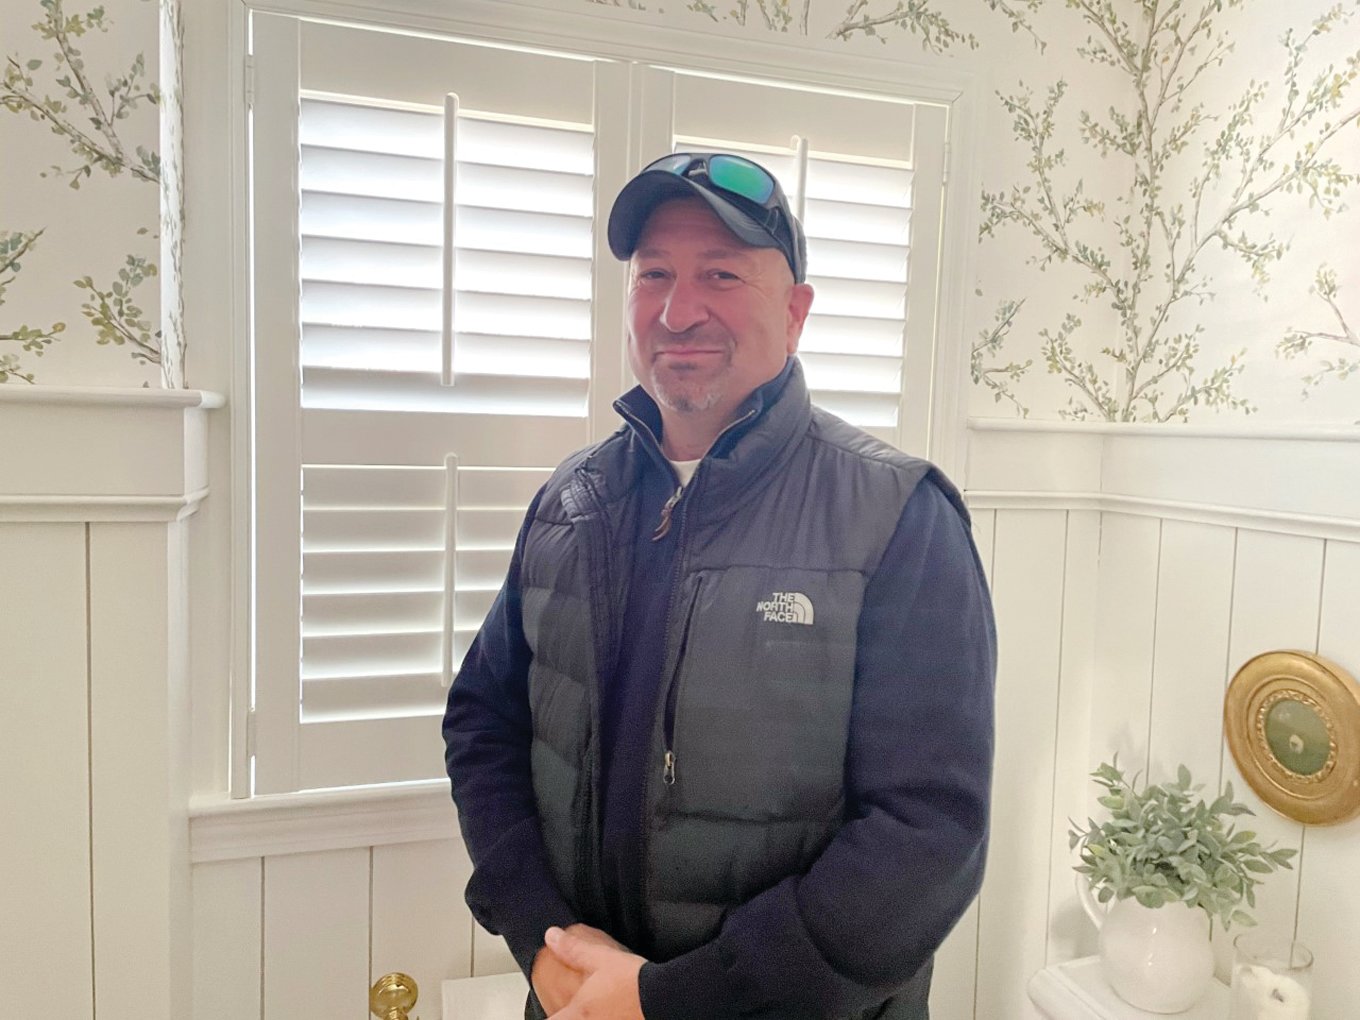 Harris Alkins has been the owner of this successful, family-owned business since 1990. His unblemished reputation means that he can be depended on for outstanding customer service, exemplary products and excellence from beginning to end at Harris Blinds & Shutters.